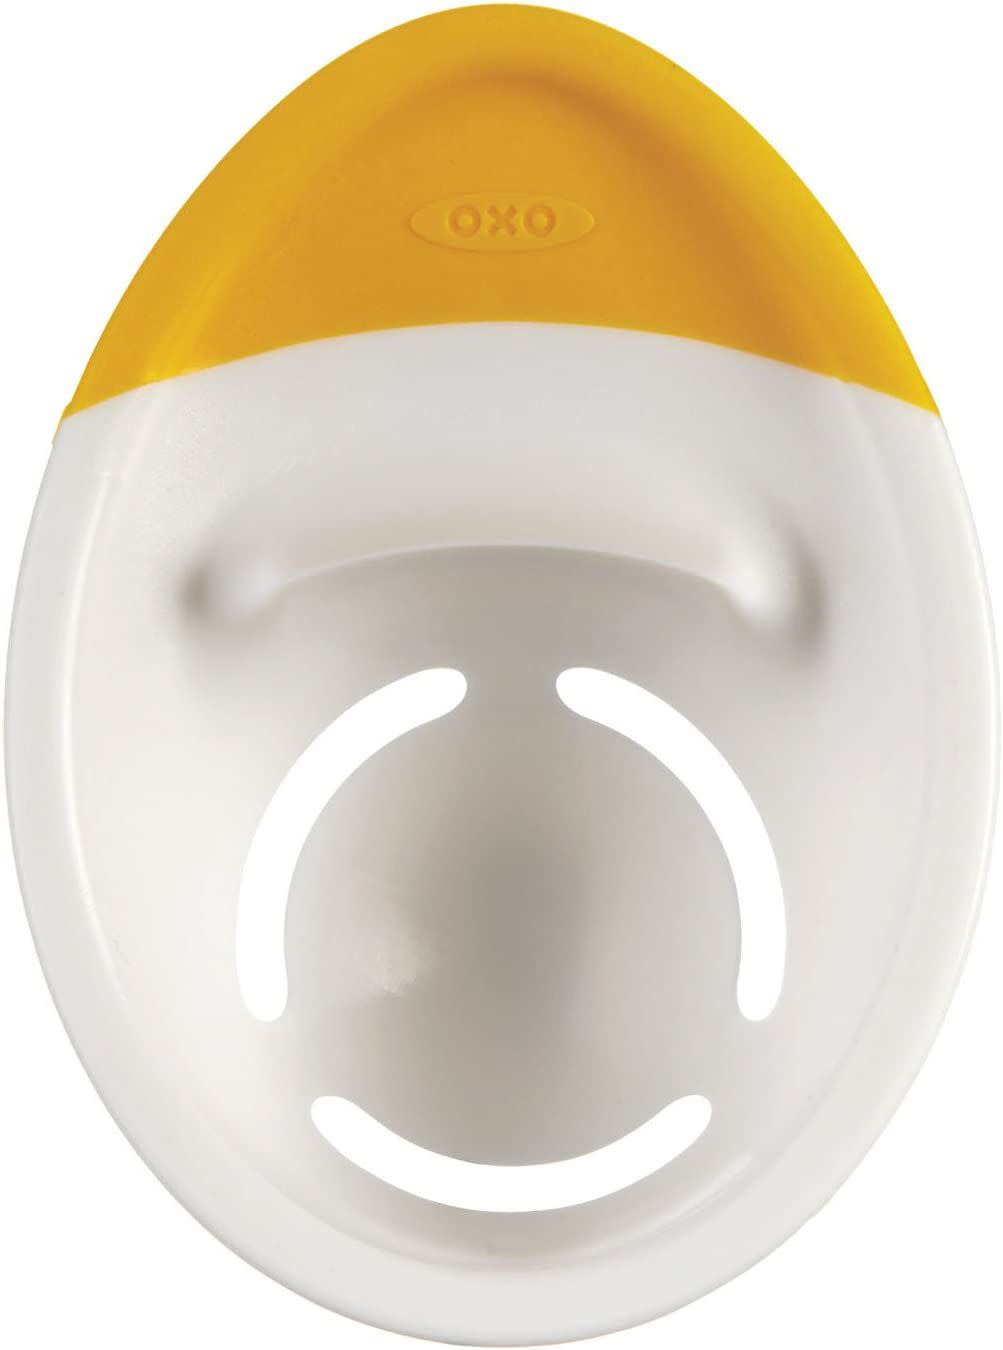 OXO Good Grips 3-in-1 Egg Separator B00A2KD8NY